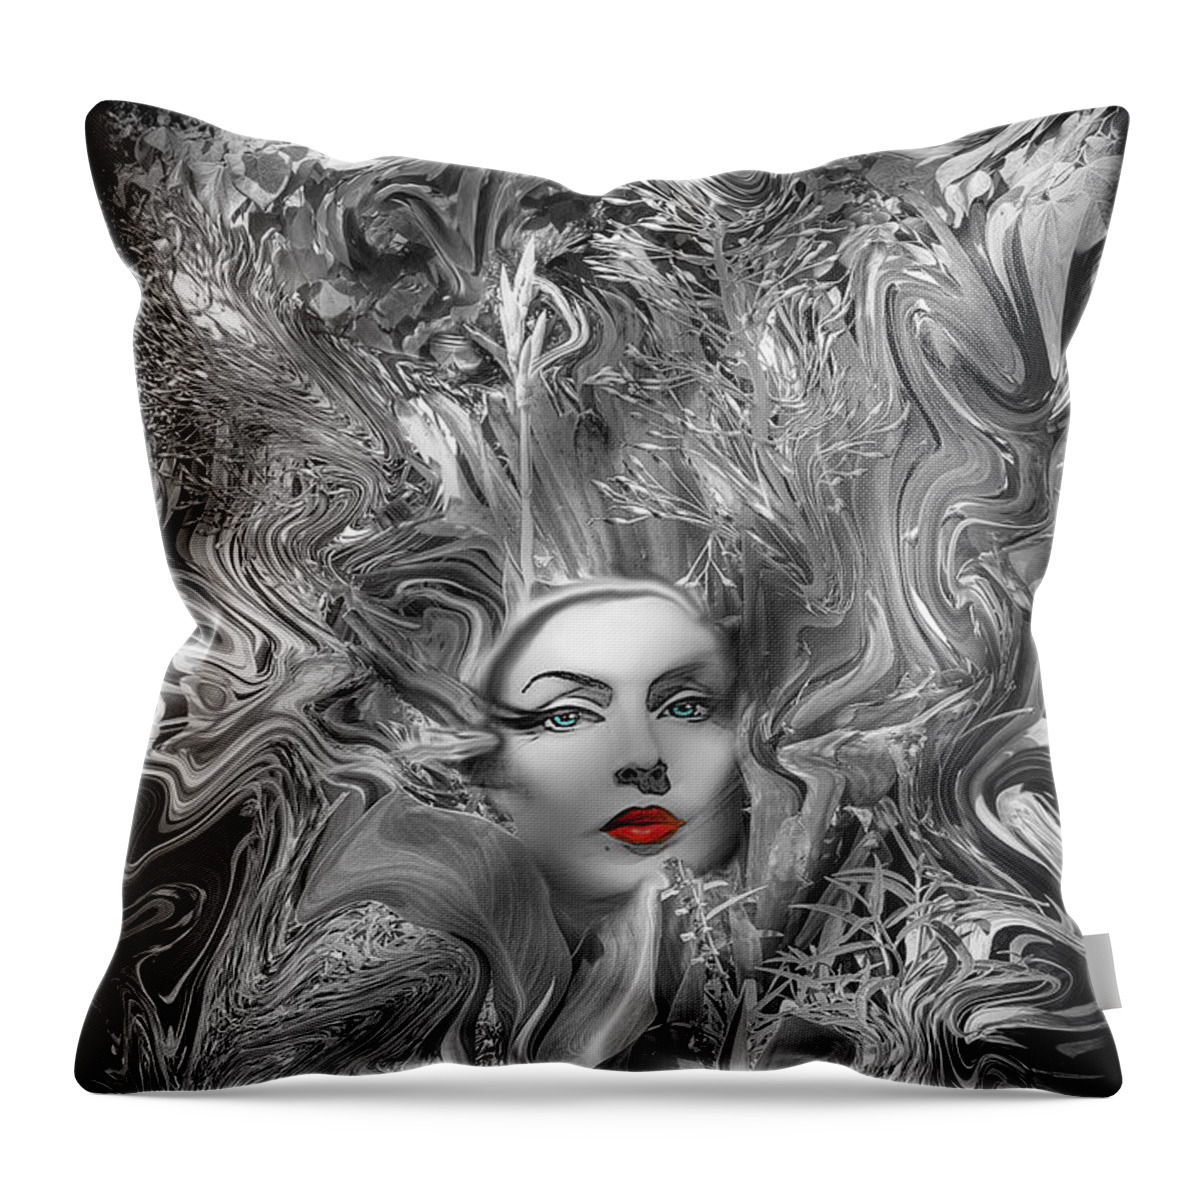 Mother Nature - B W Throw Pillow featuring the photograph Mother Nature - B W by Chuck Staley